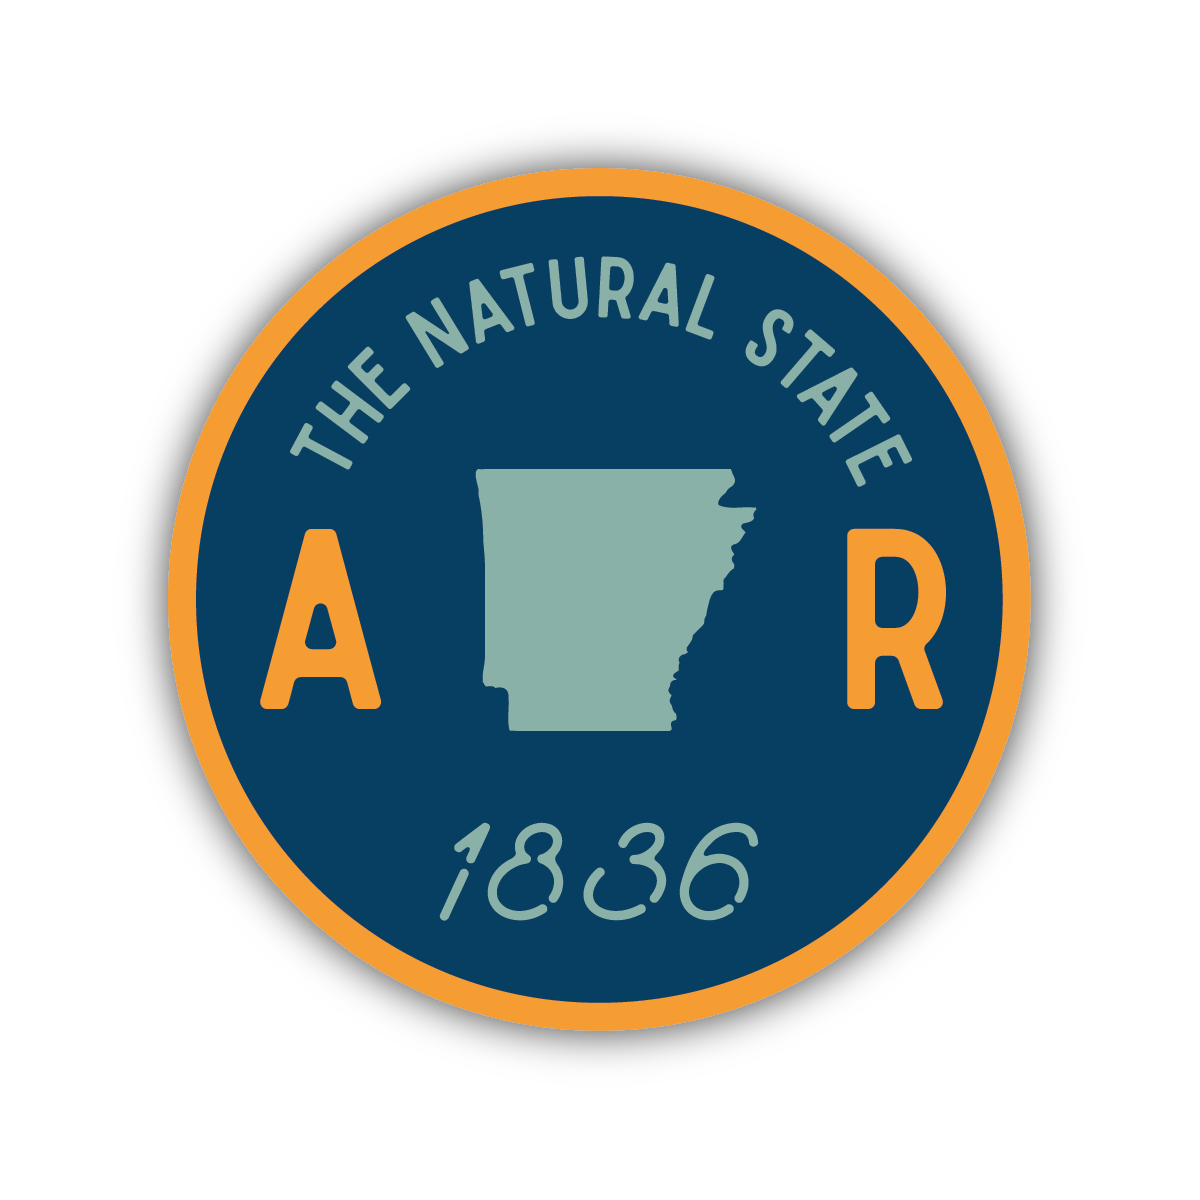 sticker on white background. round sticker has blue background and  shape of arkansas in center. "the natural state 1836" is written around the edge.